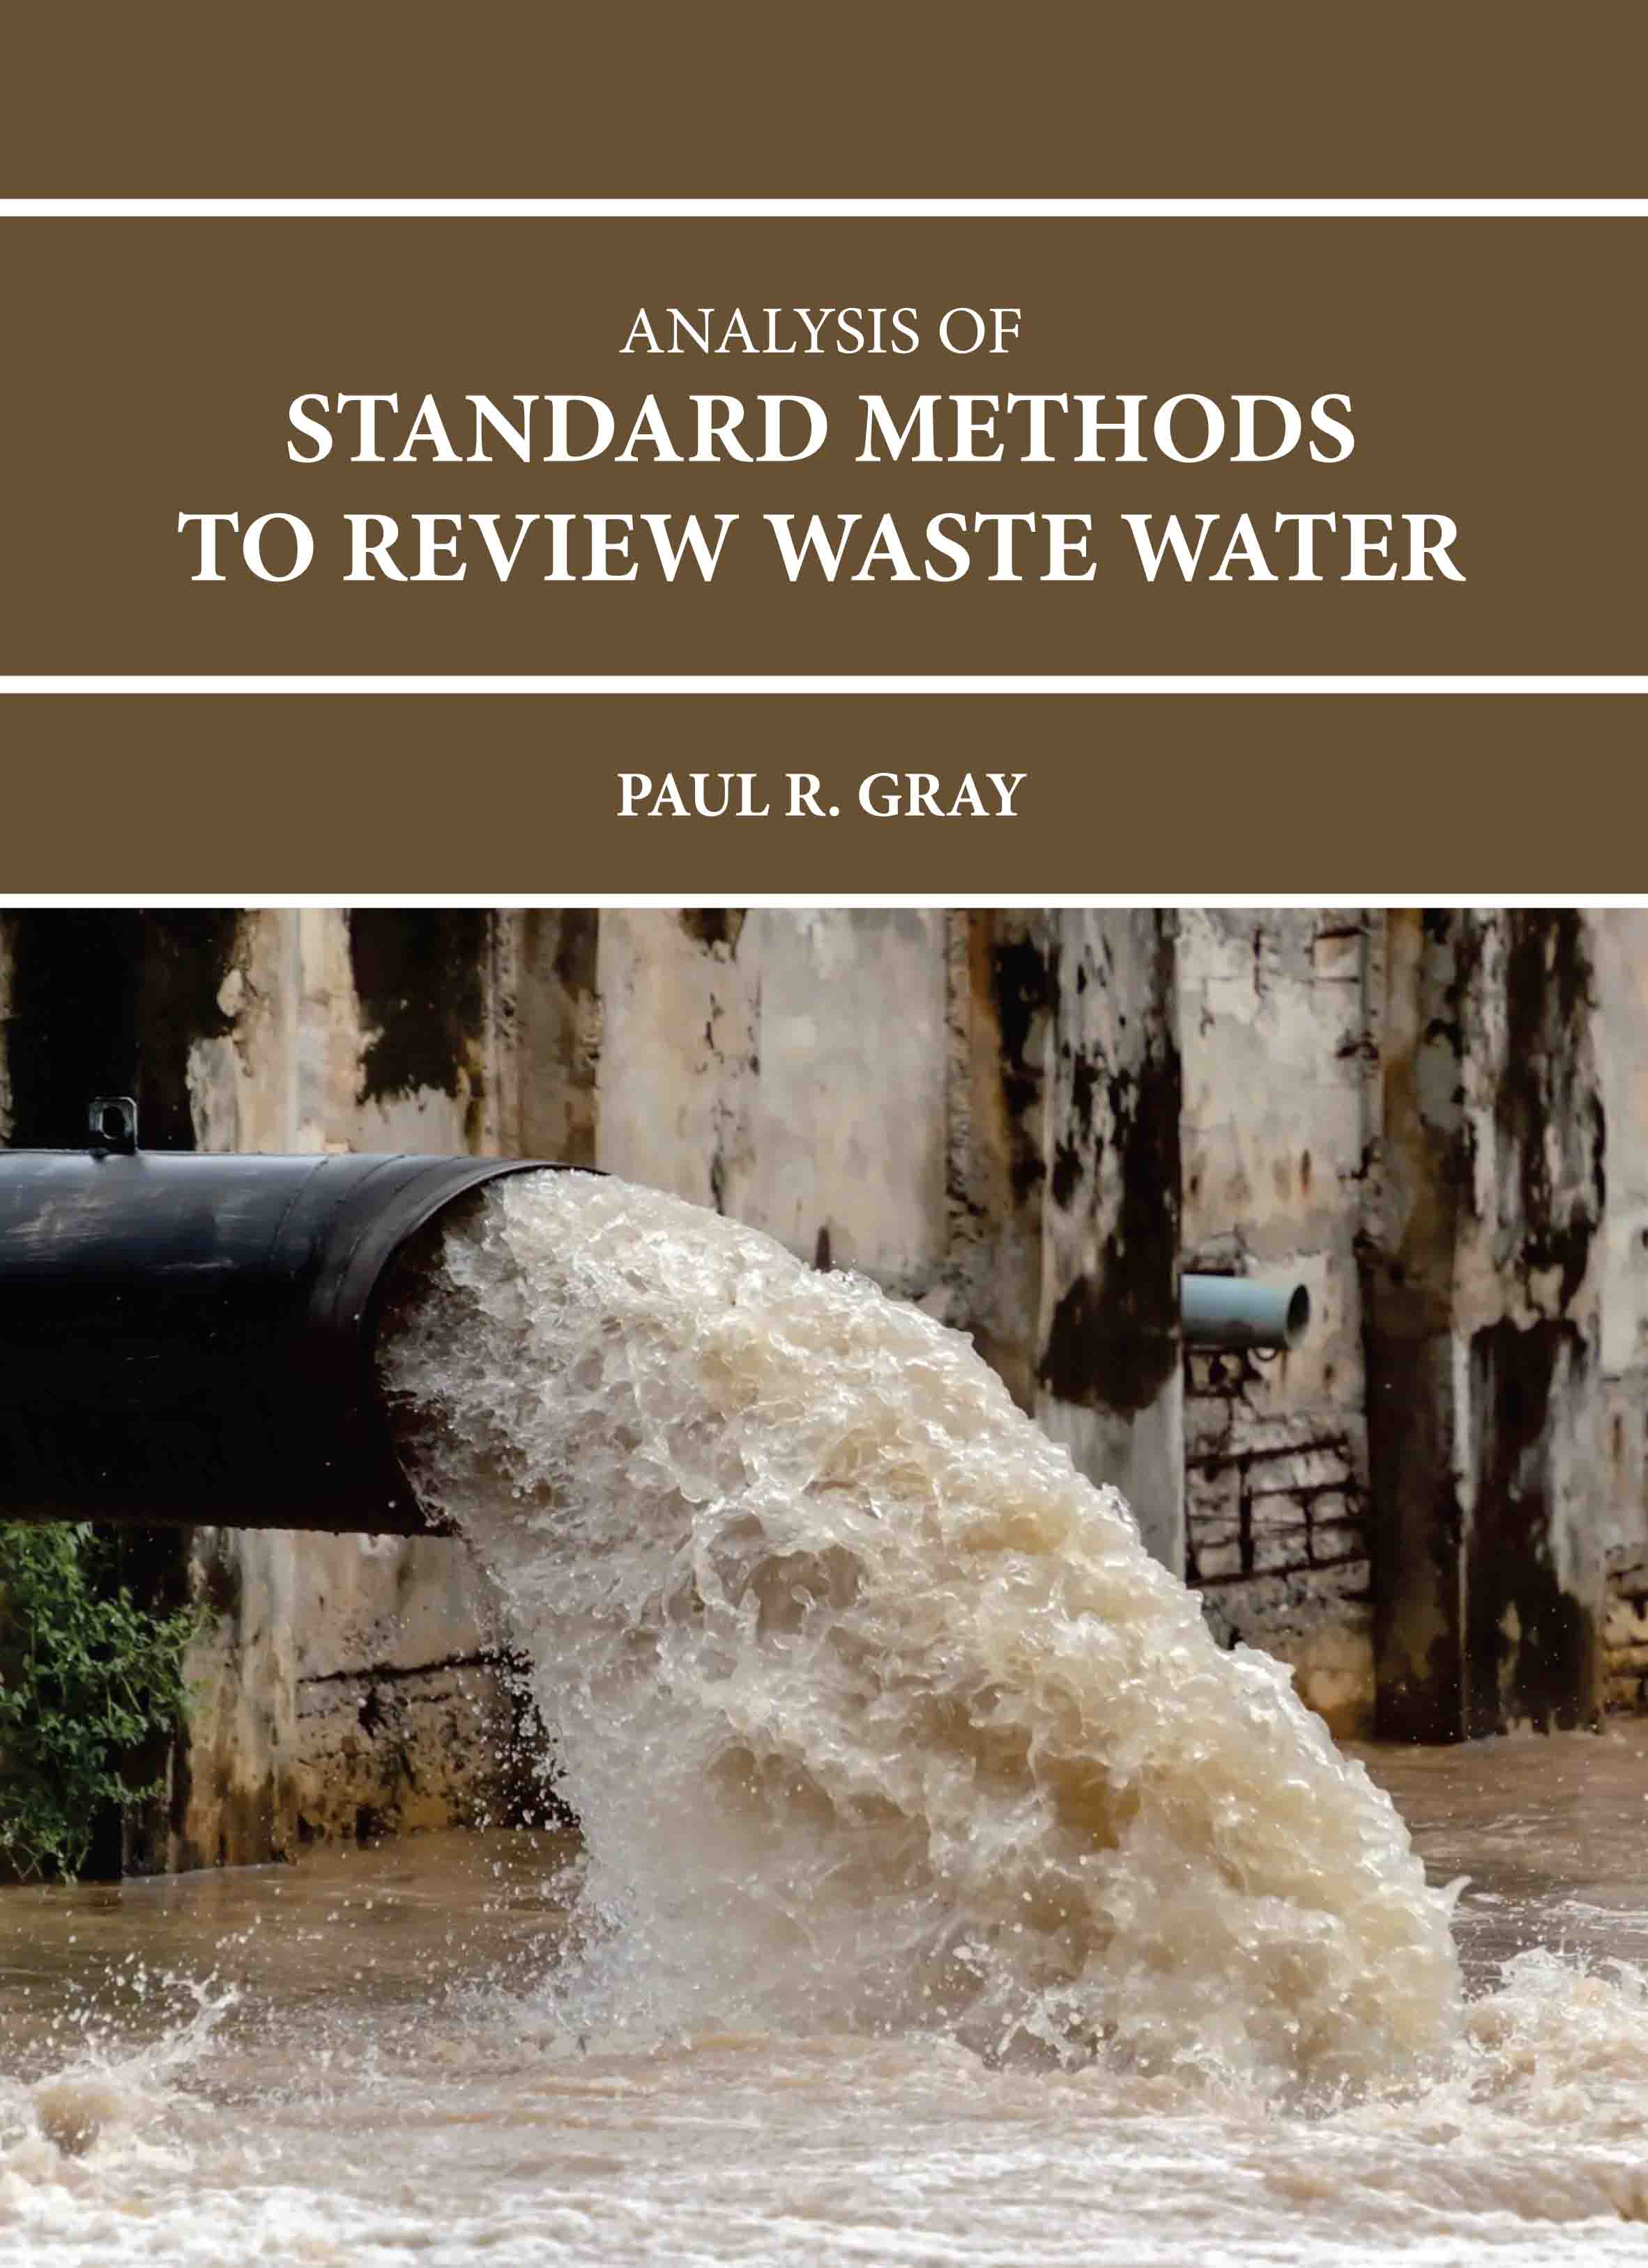 Analysis of Standard Methods to Review Waste Water